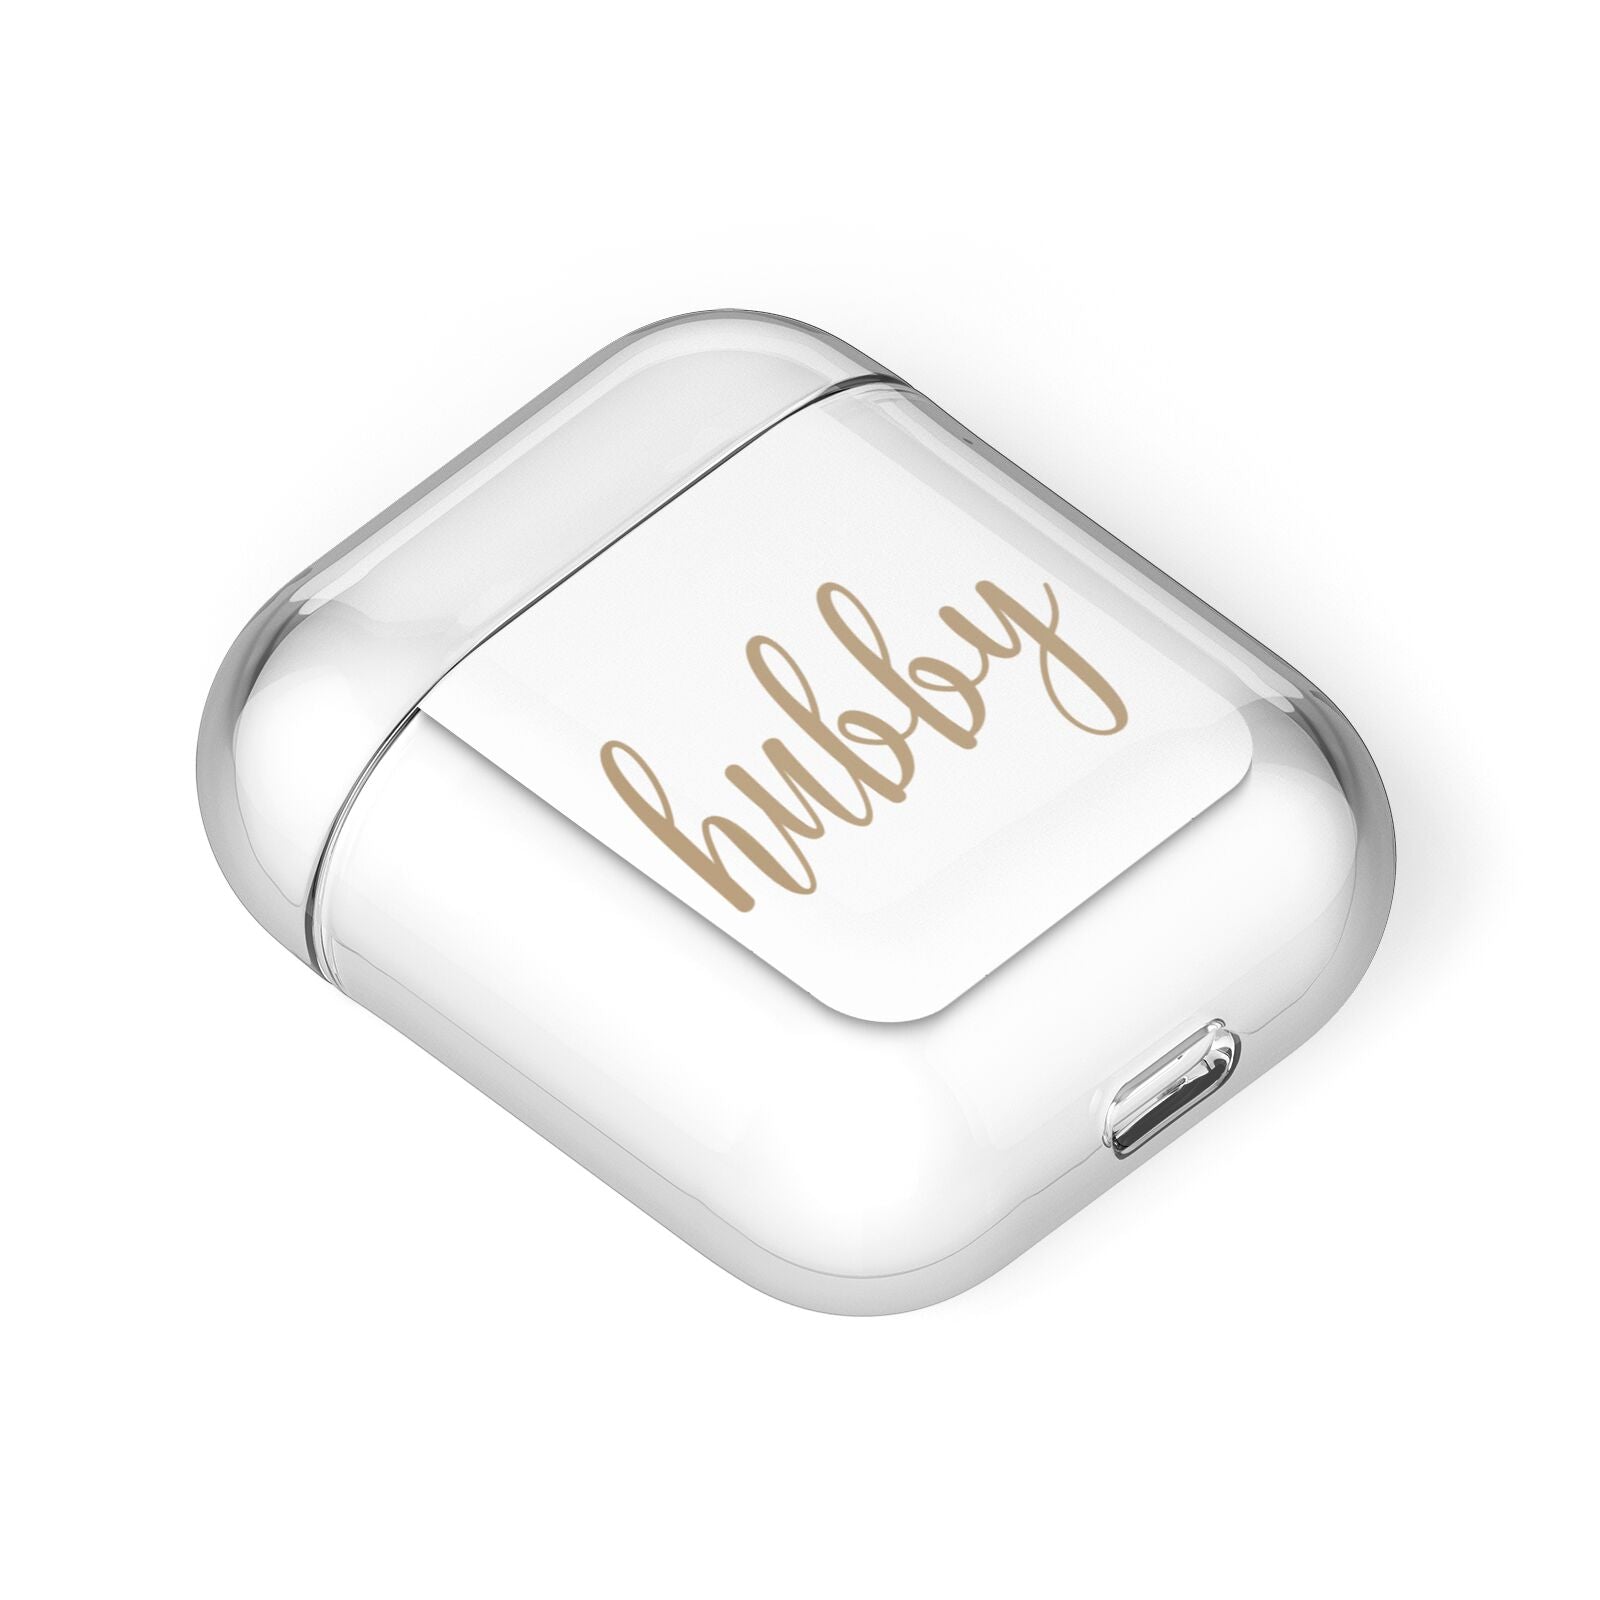 Hubby AirPods Case Laid Flat